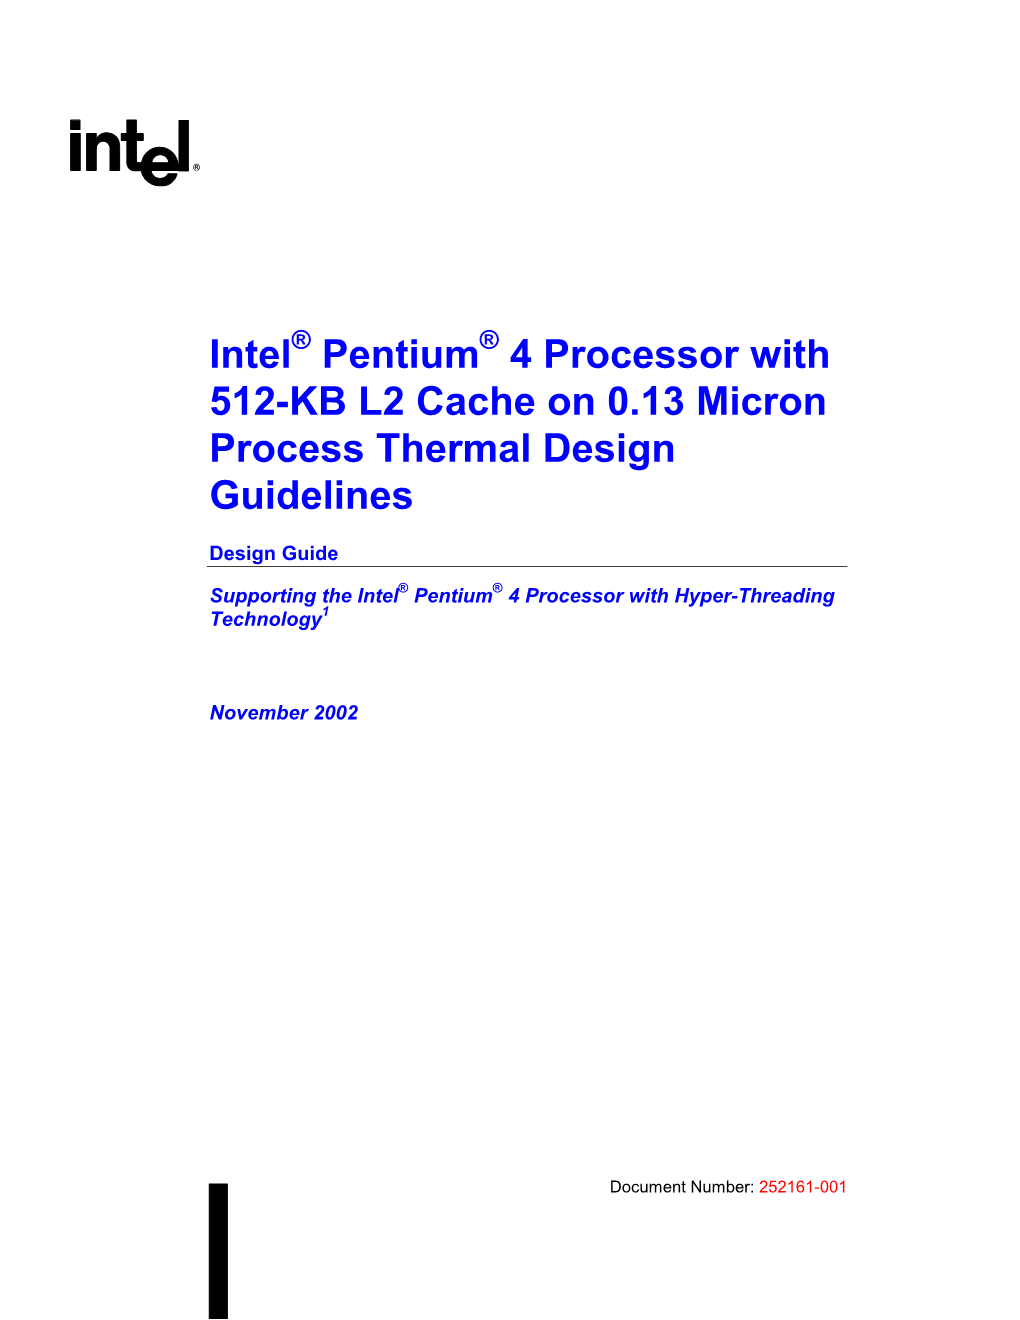 Intel® Pentium® 4 Processor with 512-KB L2 Cache on 0.13 Micron Process Thermal Design Guidelines Design Guide